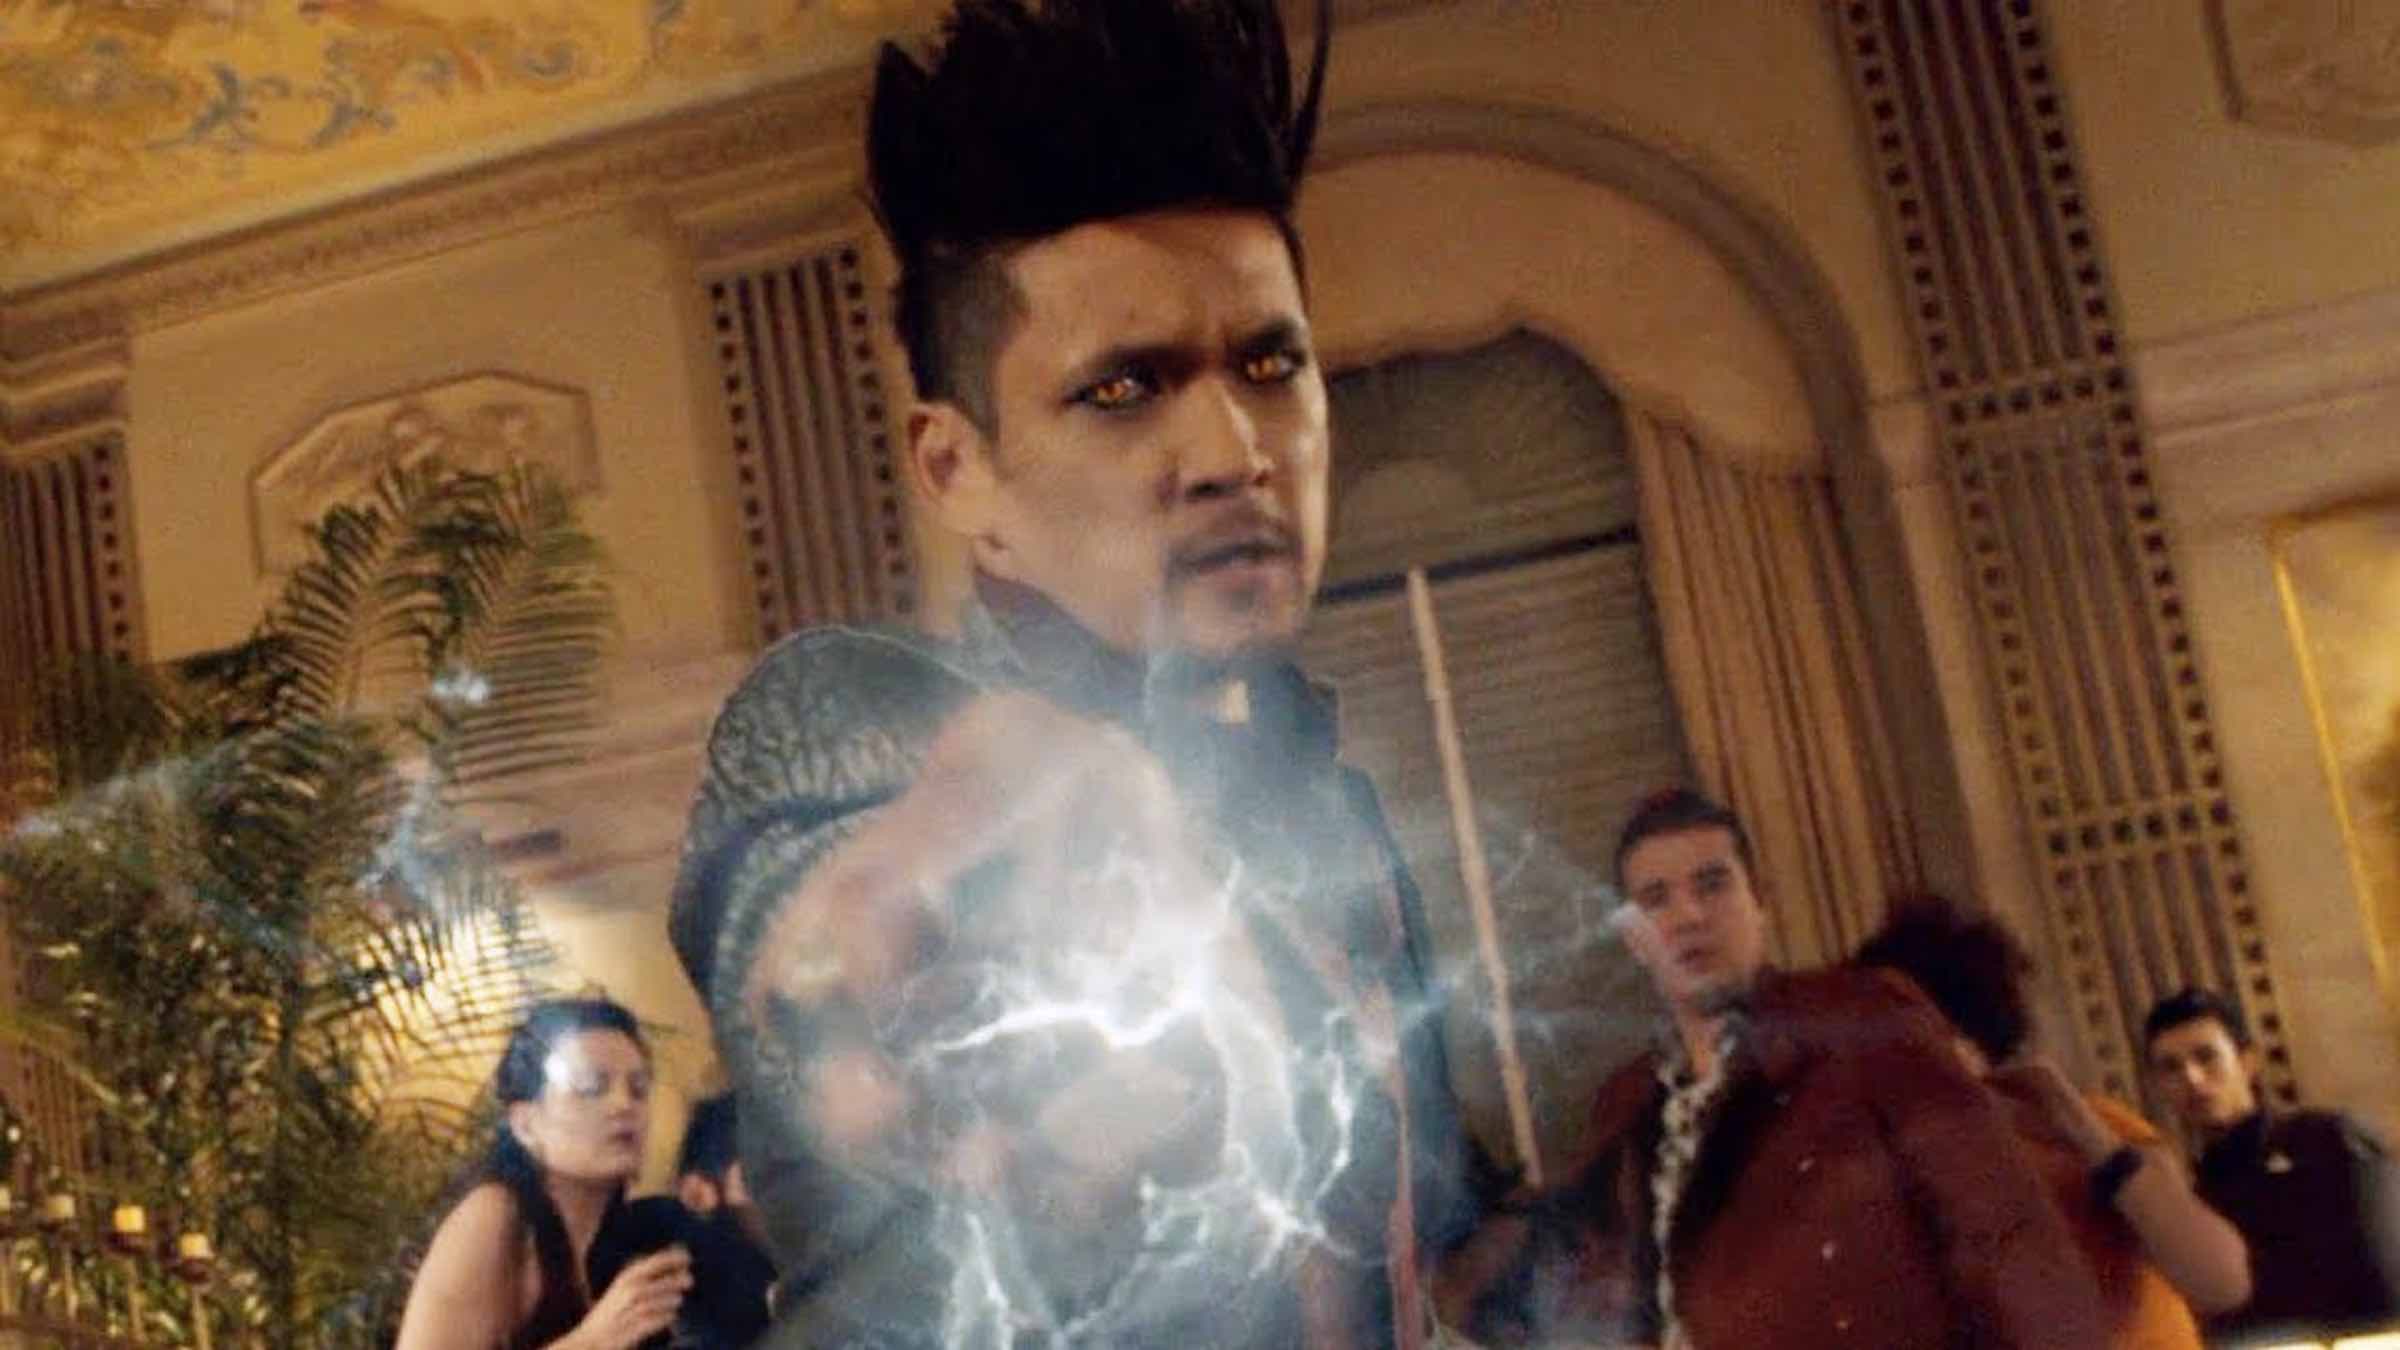 Celebrate the magical warlock Magnus Bane from 'Shadowhunters' in our new quiz. Do you stan? Put your knowledge to the test!